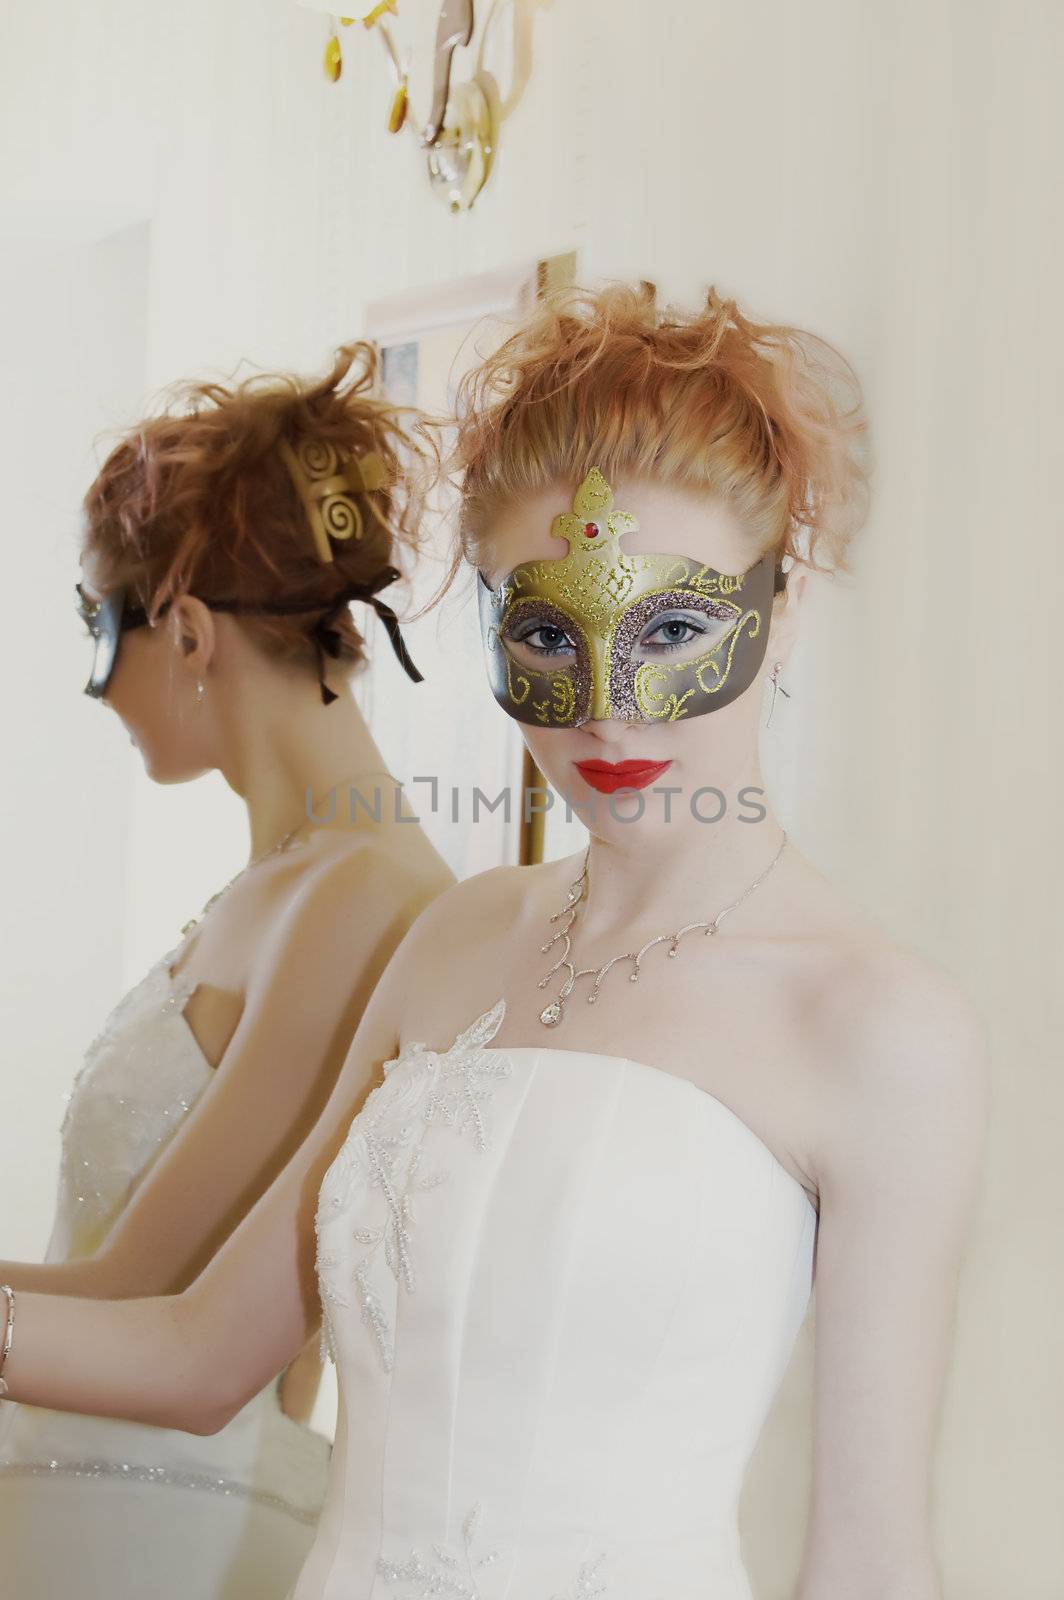 Grunge shot of young red-head with mask and white dress